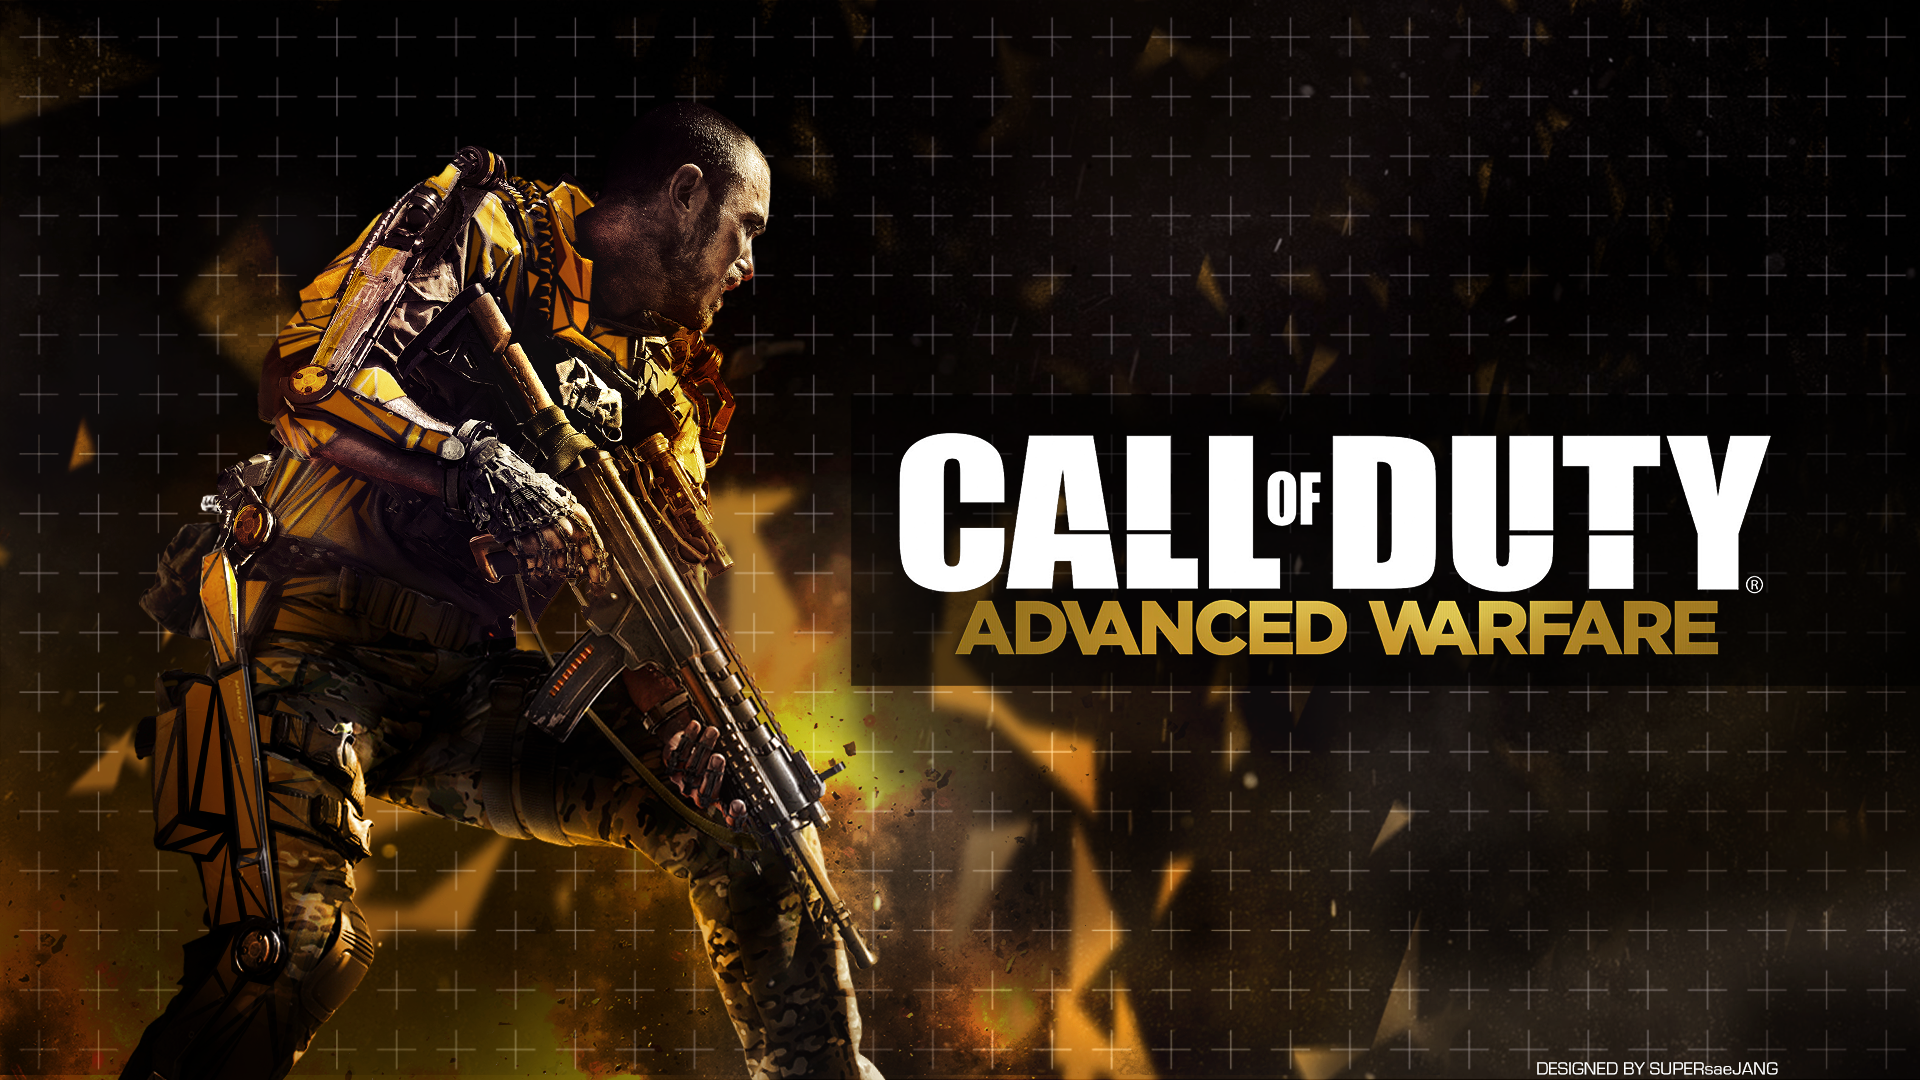 Free download 1920 x 1080 2216 kB png Call of Duty Advanced Warfare Thumbnail [1920x1080] for your Desktop, Mobile & Tablet. Explore COD Zombies iPhone Wallpaper